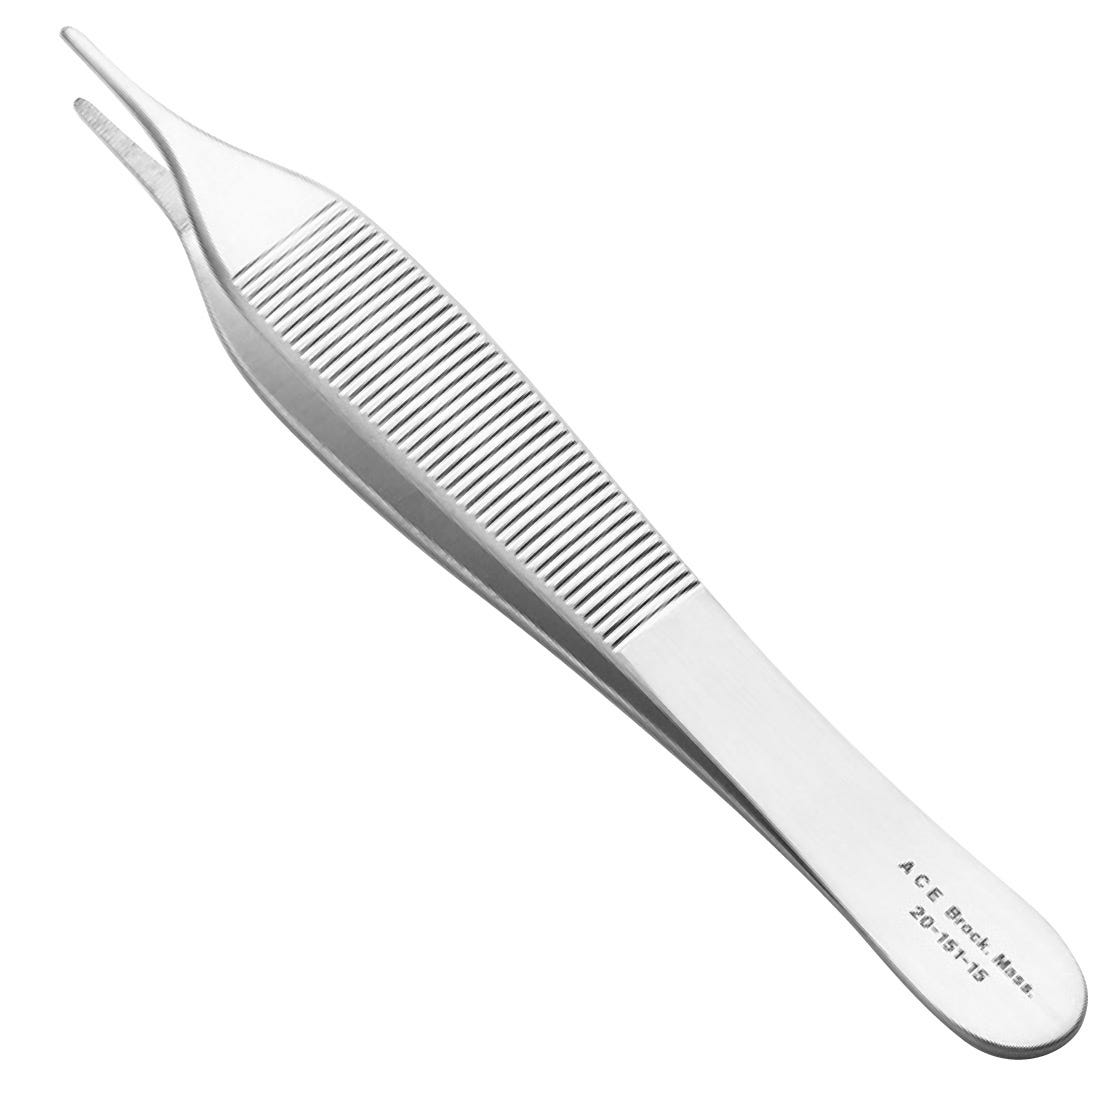 ACE Adson Tissue Forcep #41, serrated